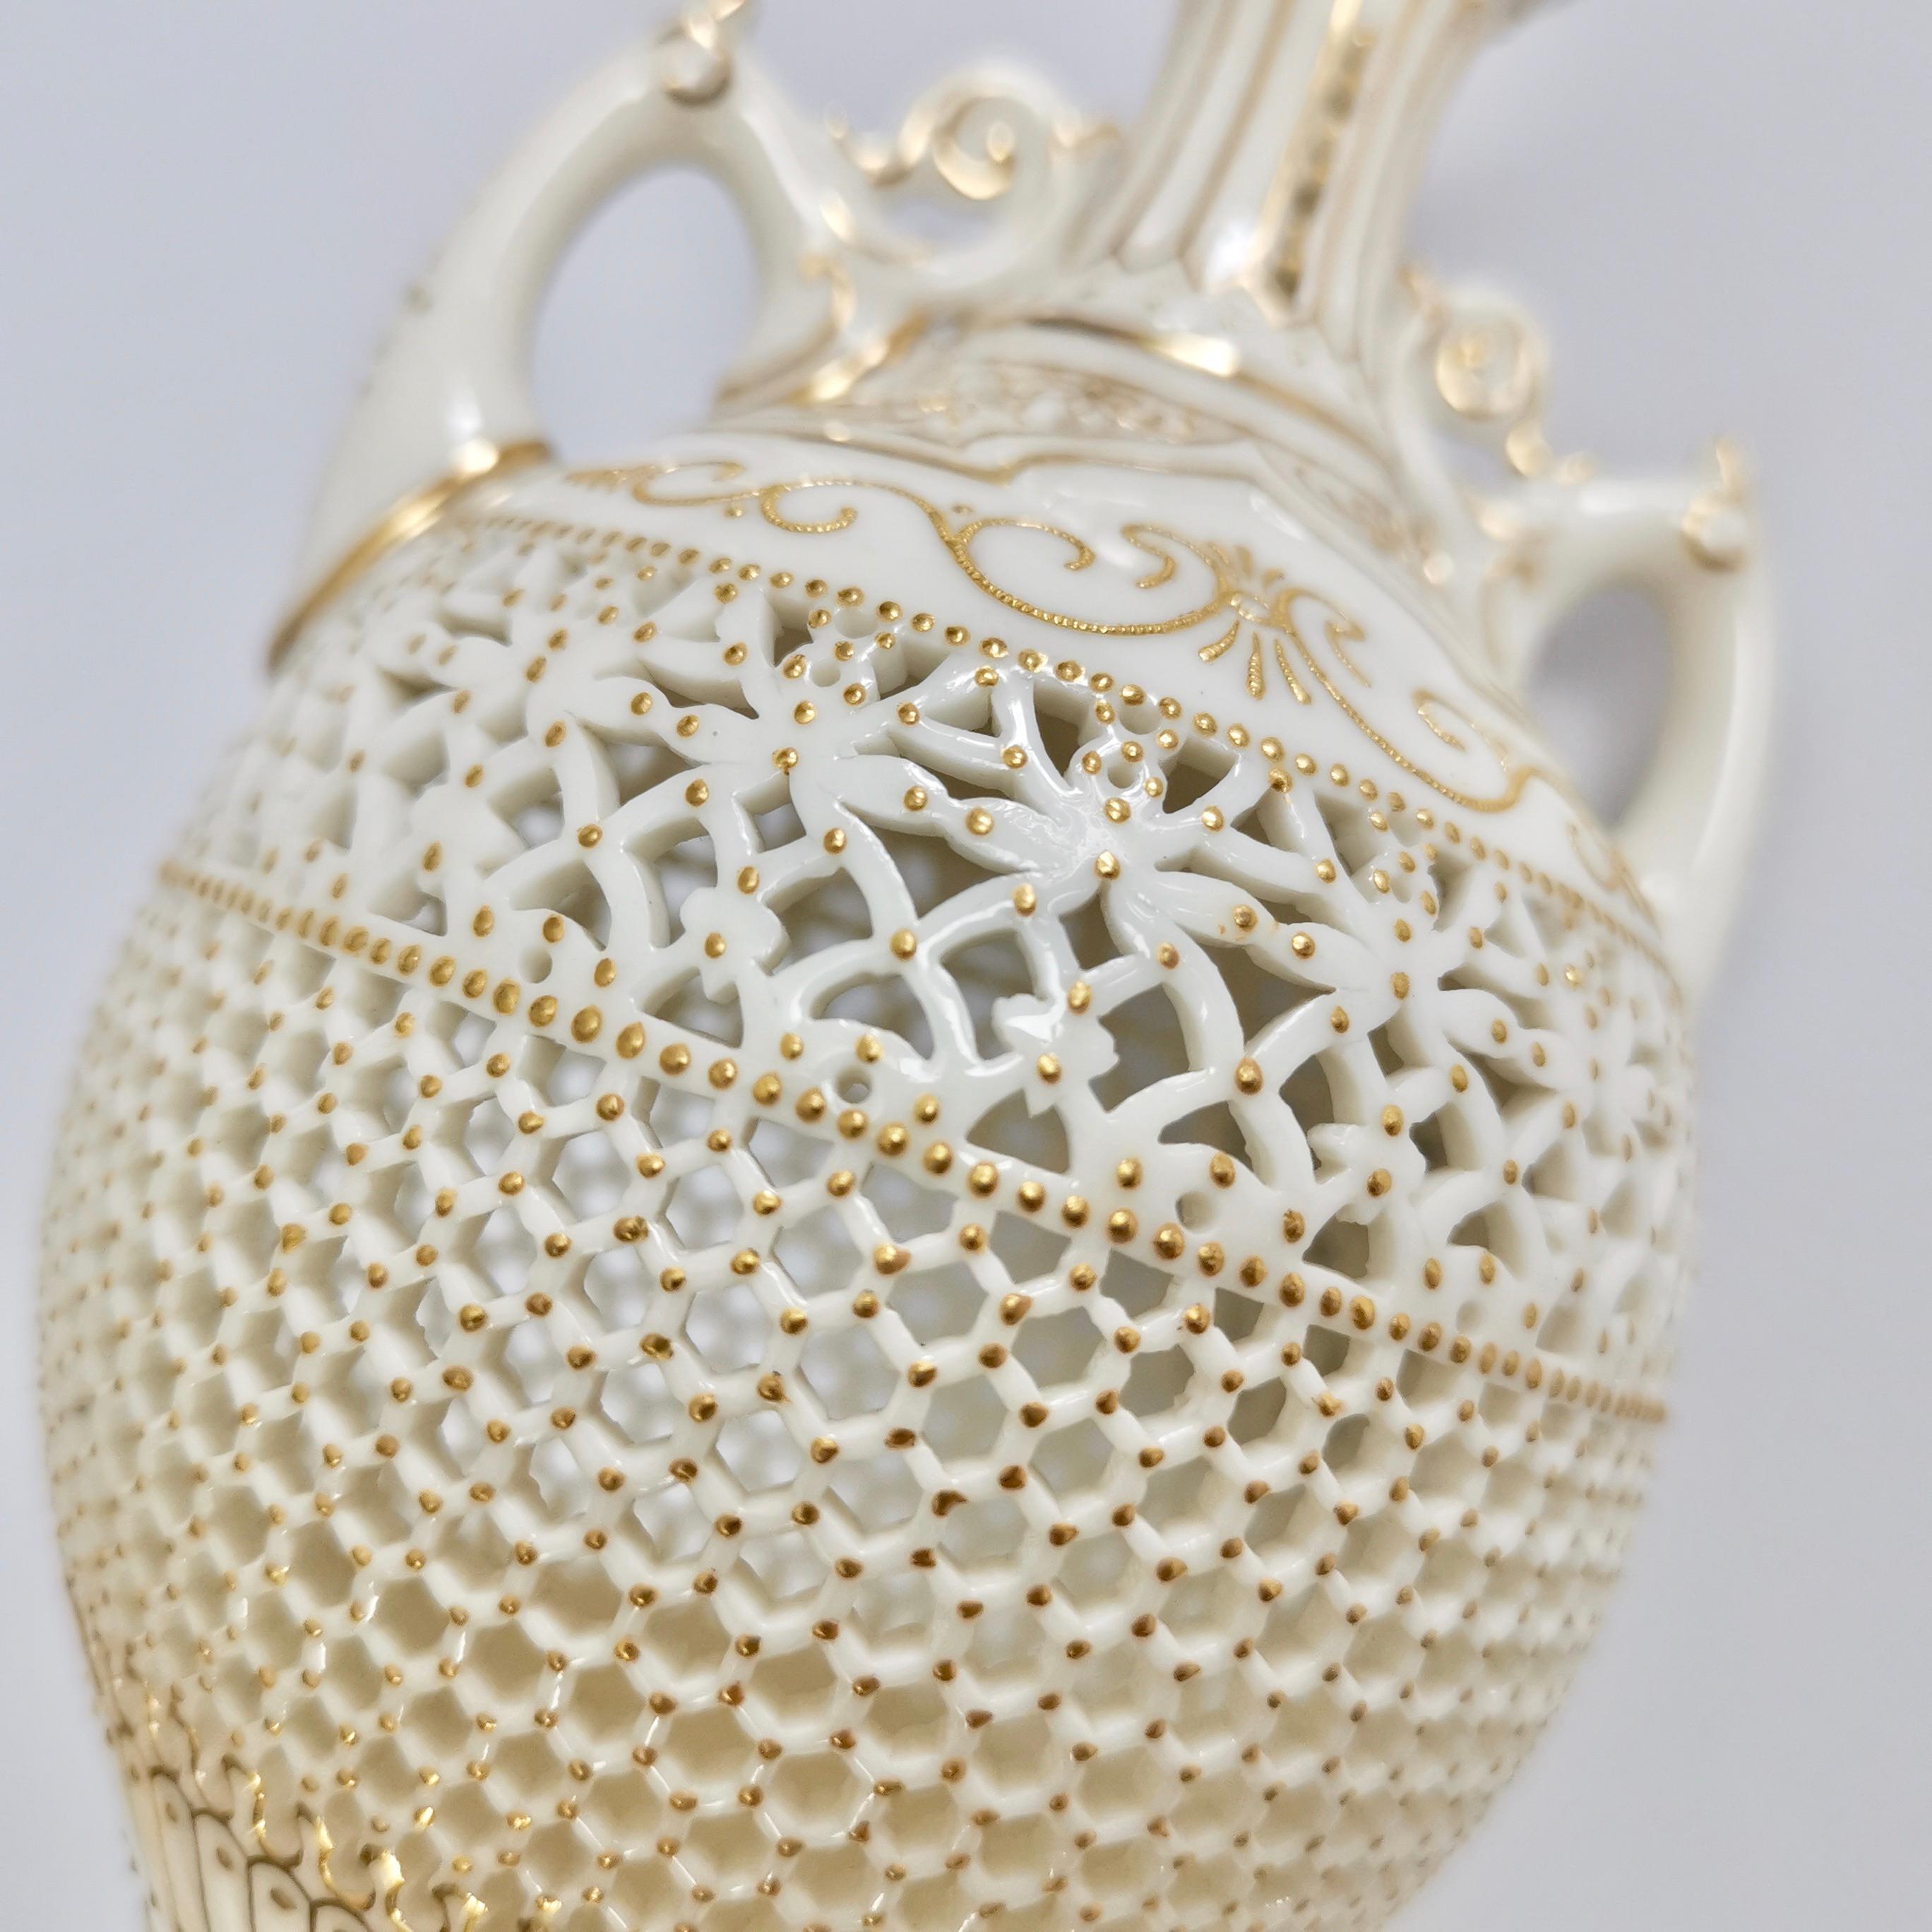 Royal Worcester Small Persian Porcelain Vase, Reticulated George Owen, 1917 6